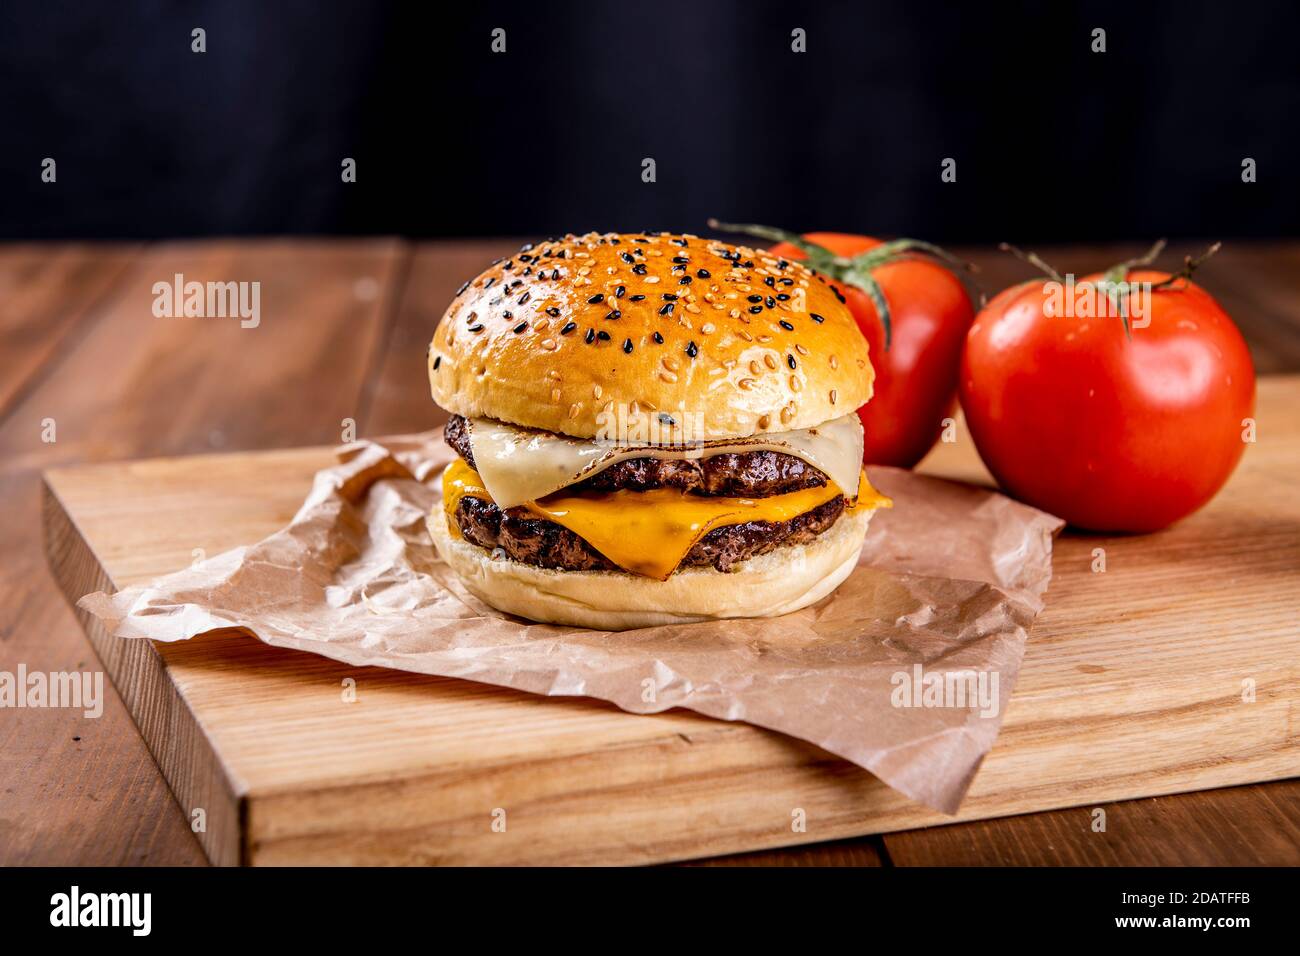 Hamburger served with two tomatoes Stock Photo